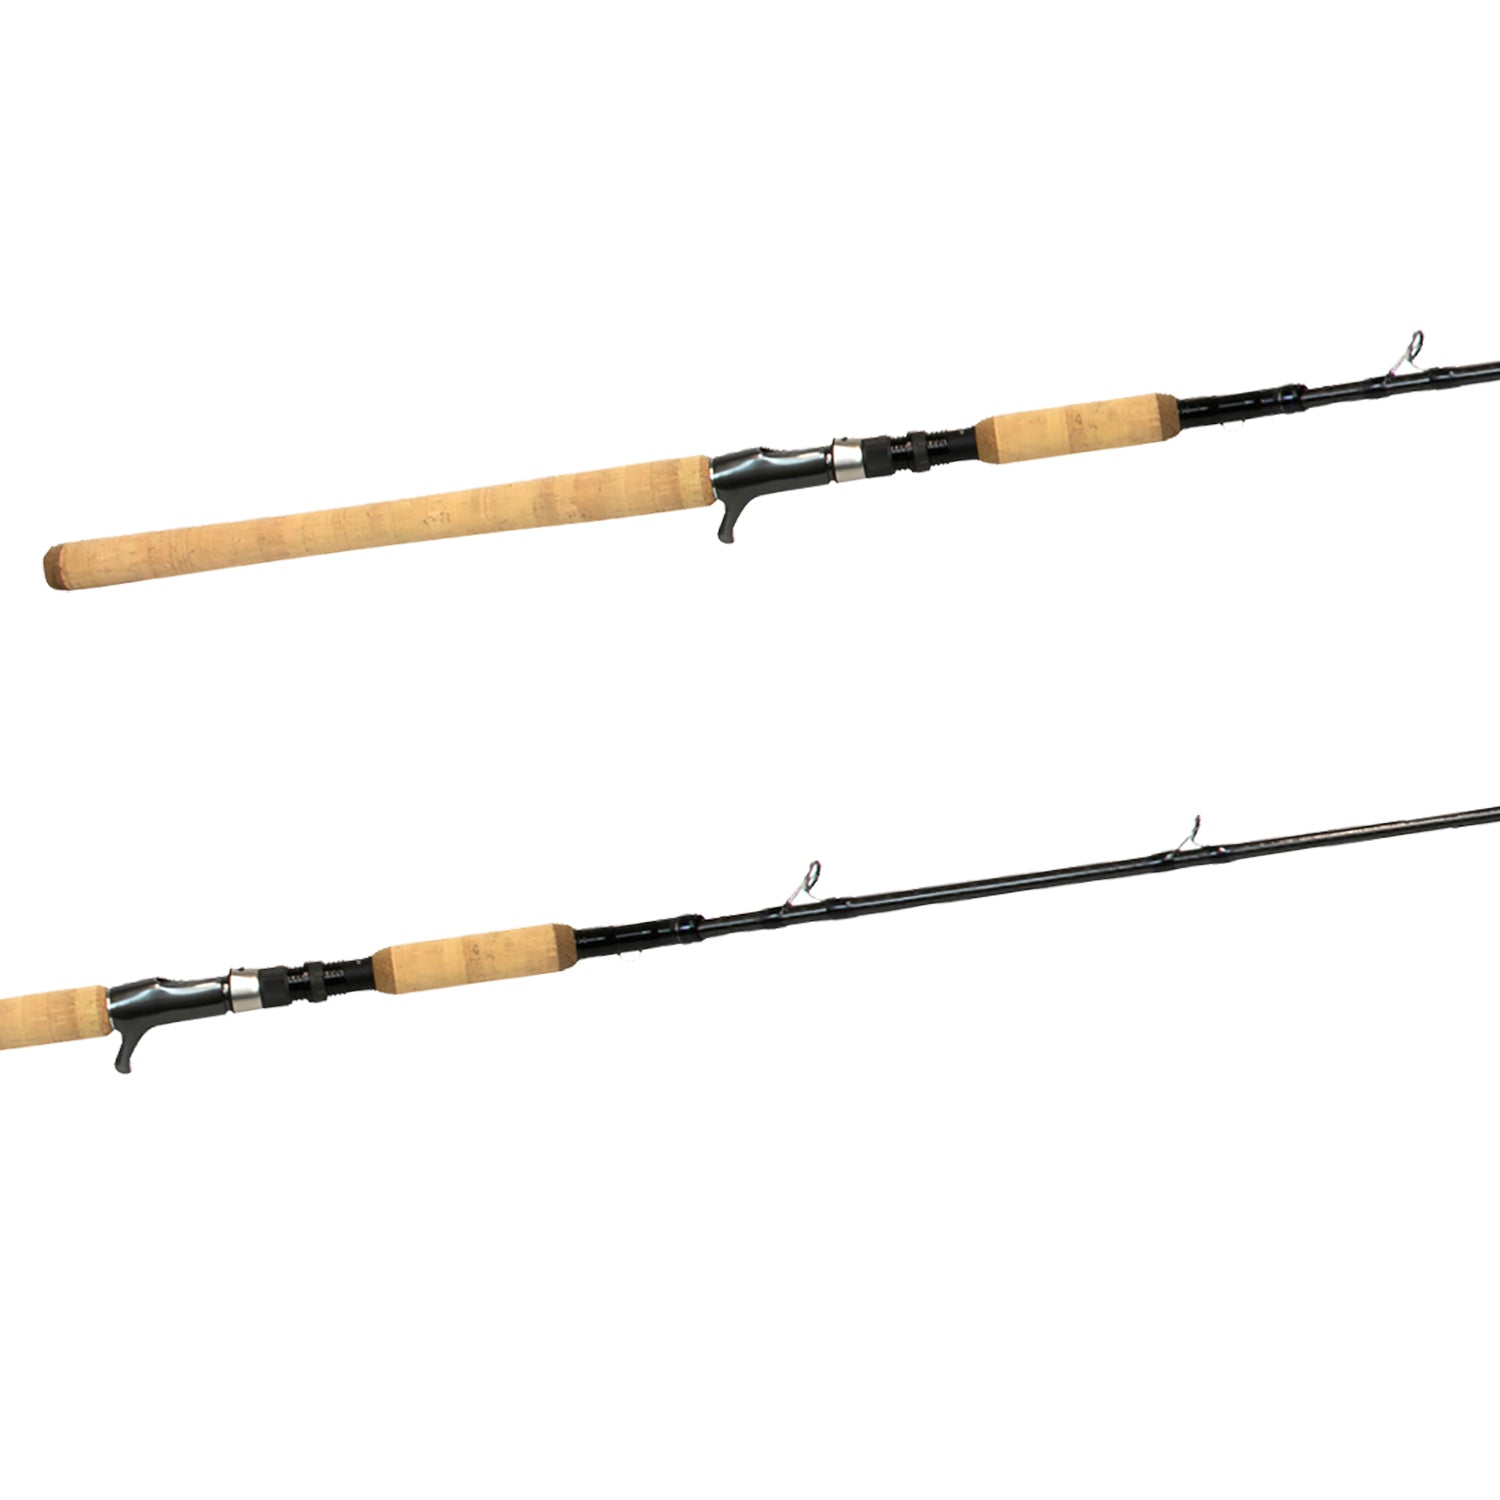 Shimano Compre Bait Casting Rod And Bantam Reel Combo